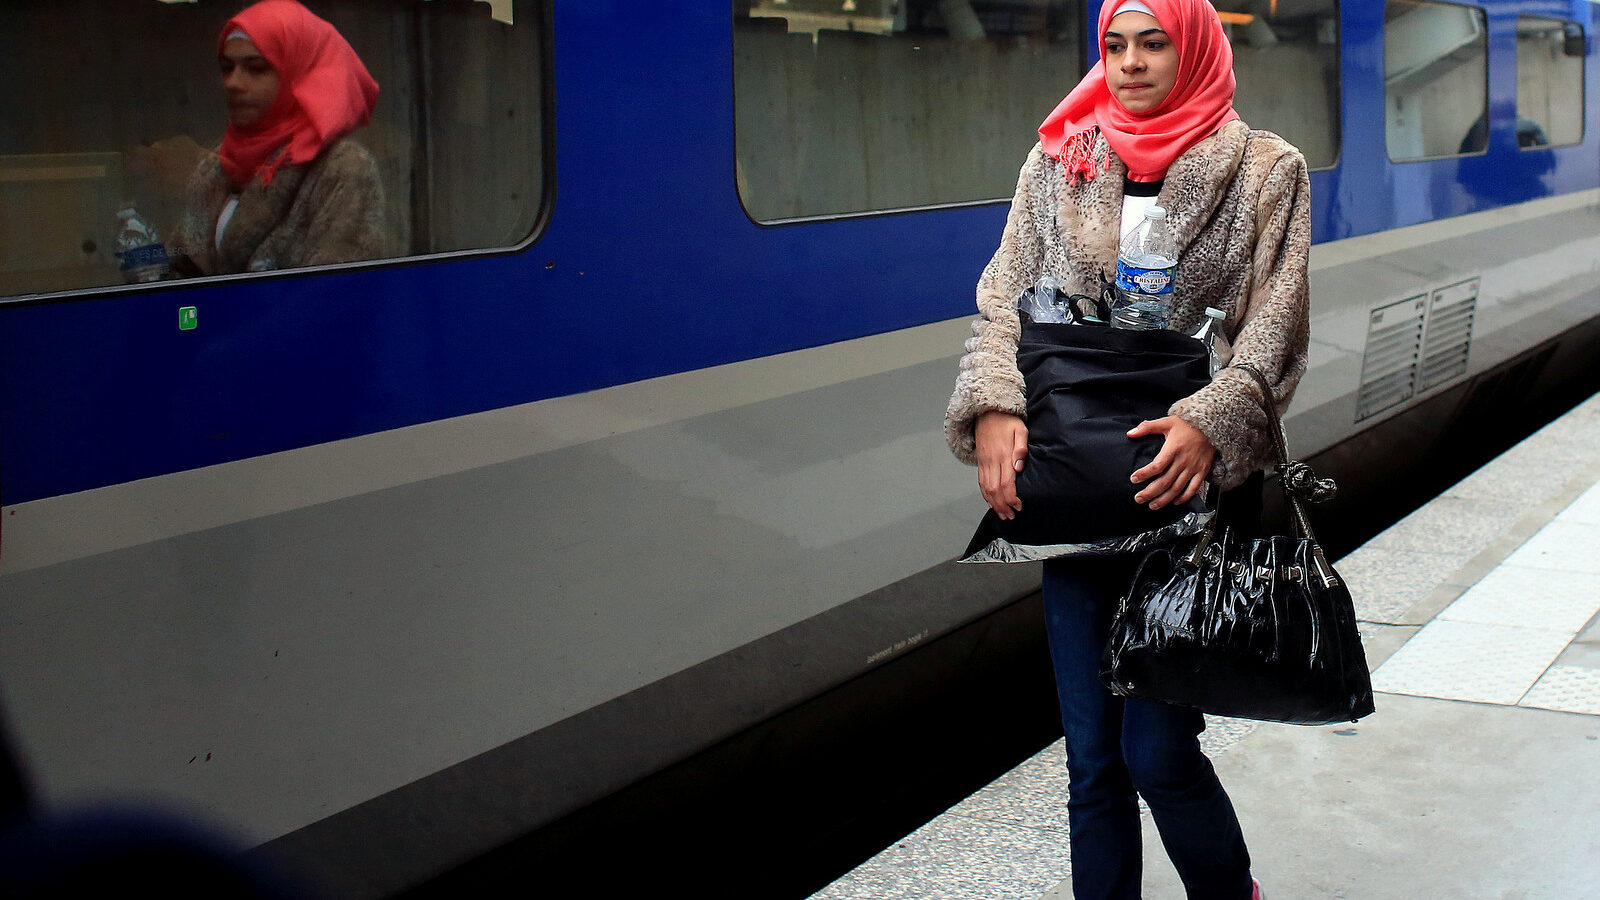 Syrian refugee Isra Abomosa, 18, carries belongings before boarding a train to Vannes, western France, in the Montparnasse railway station, in Paris, France .Her slain husband, bombed-out Damascus home and refugee life are behind her. (AP Photo/Thibault Camus)